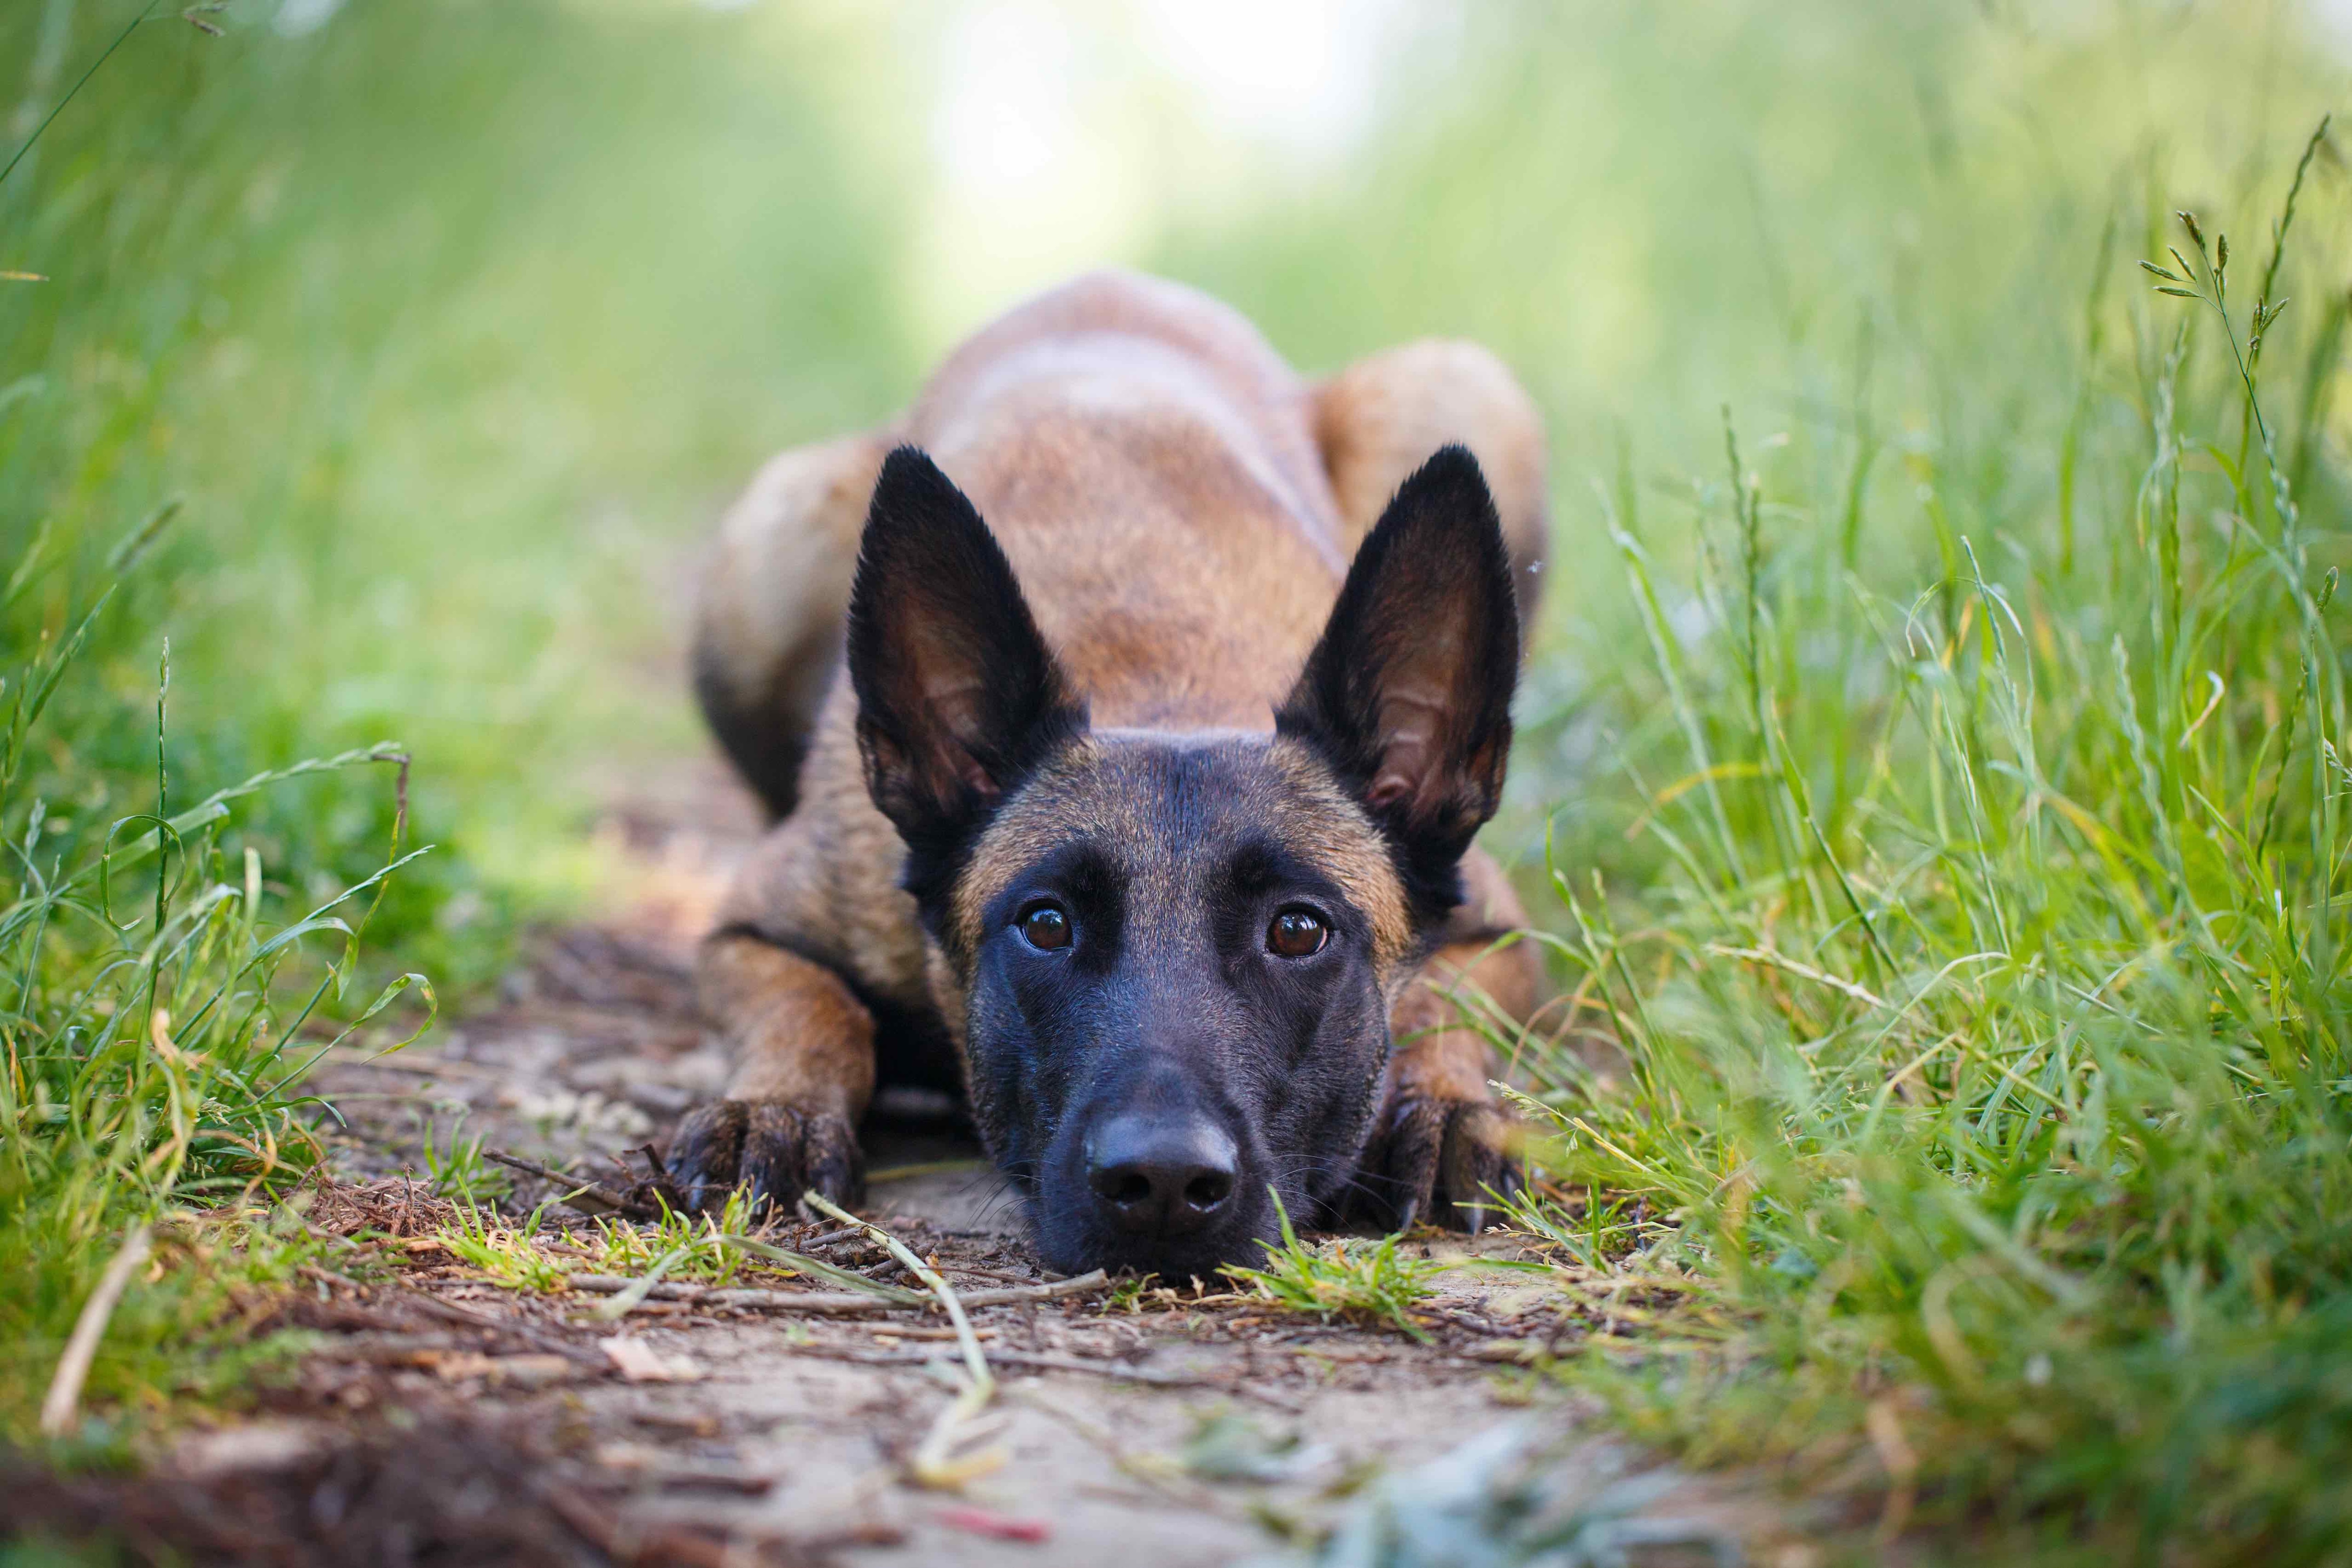 belgian malinois dog lying down in grass and looking straight at a camera